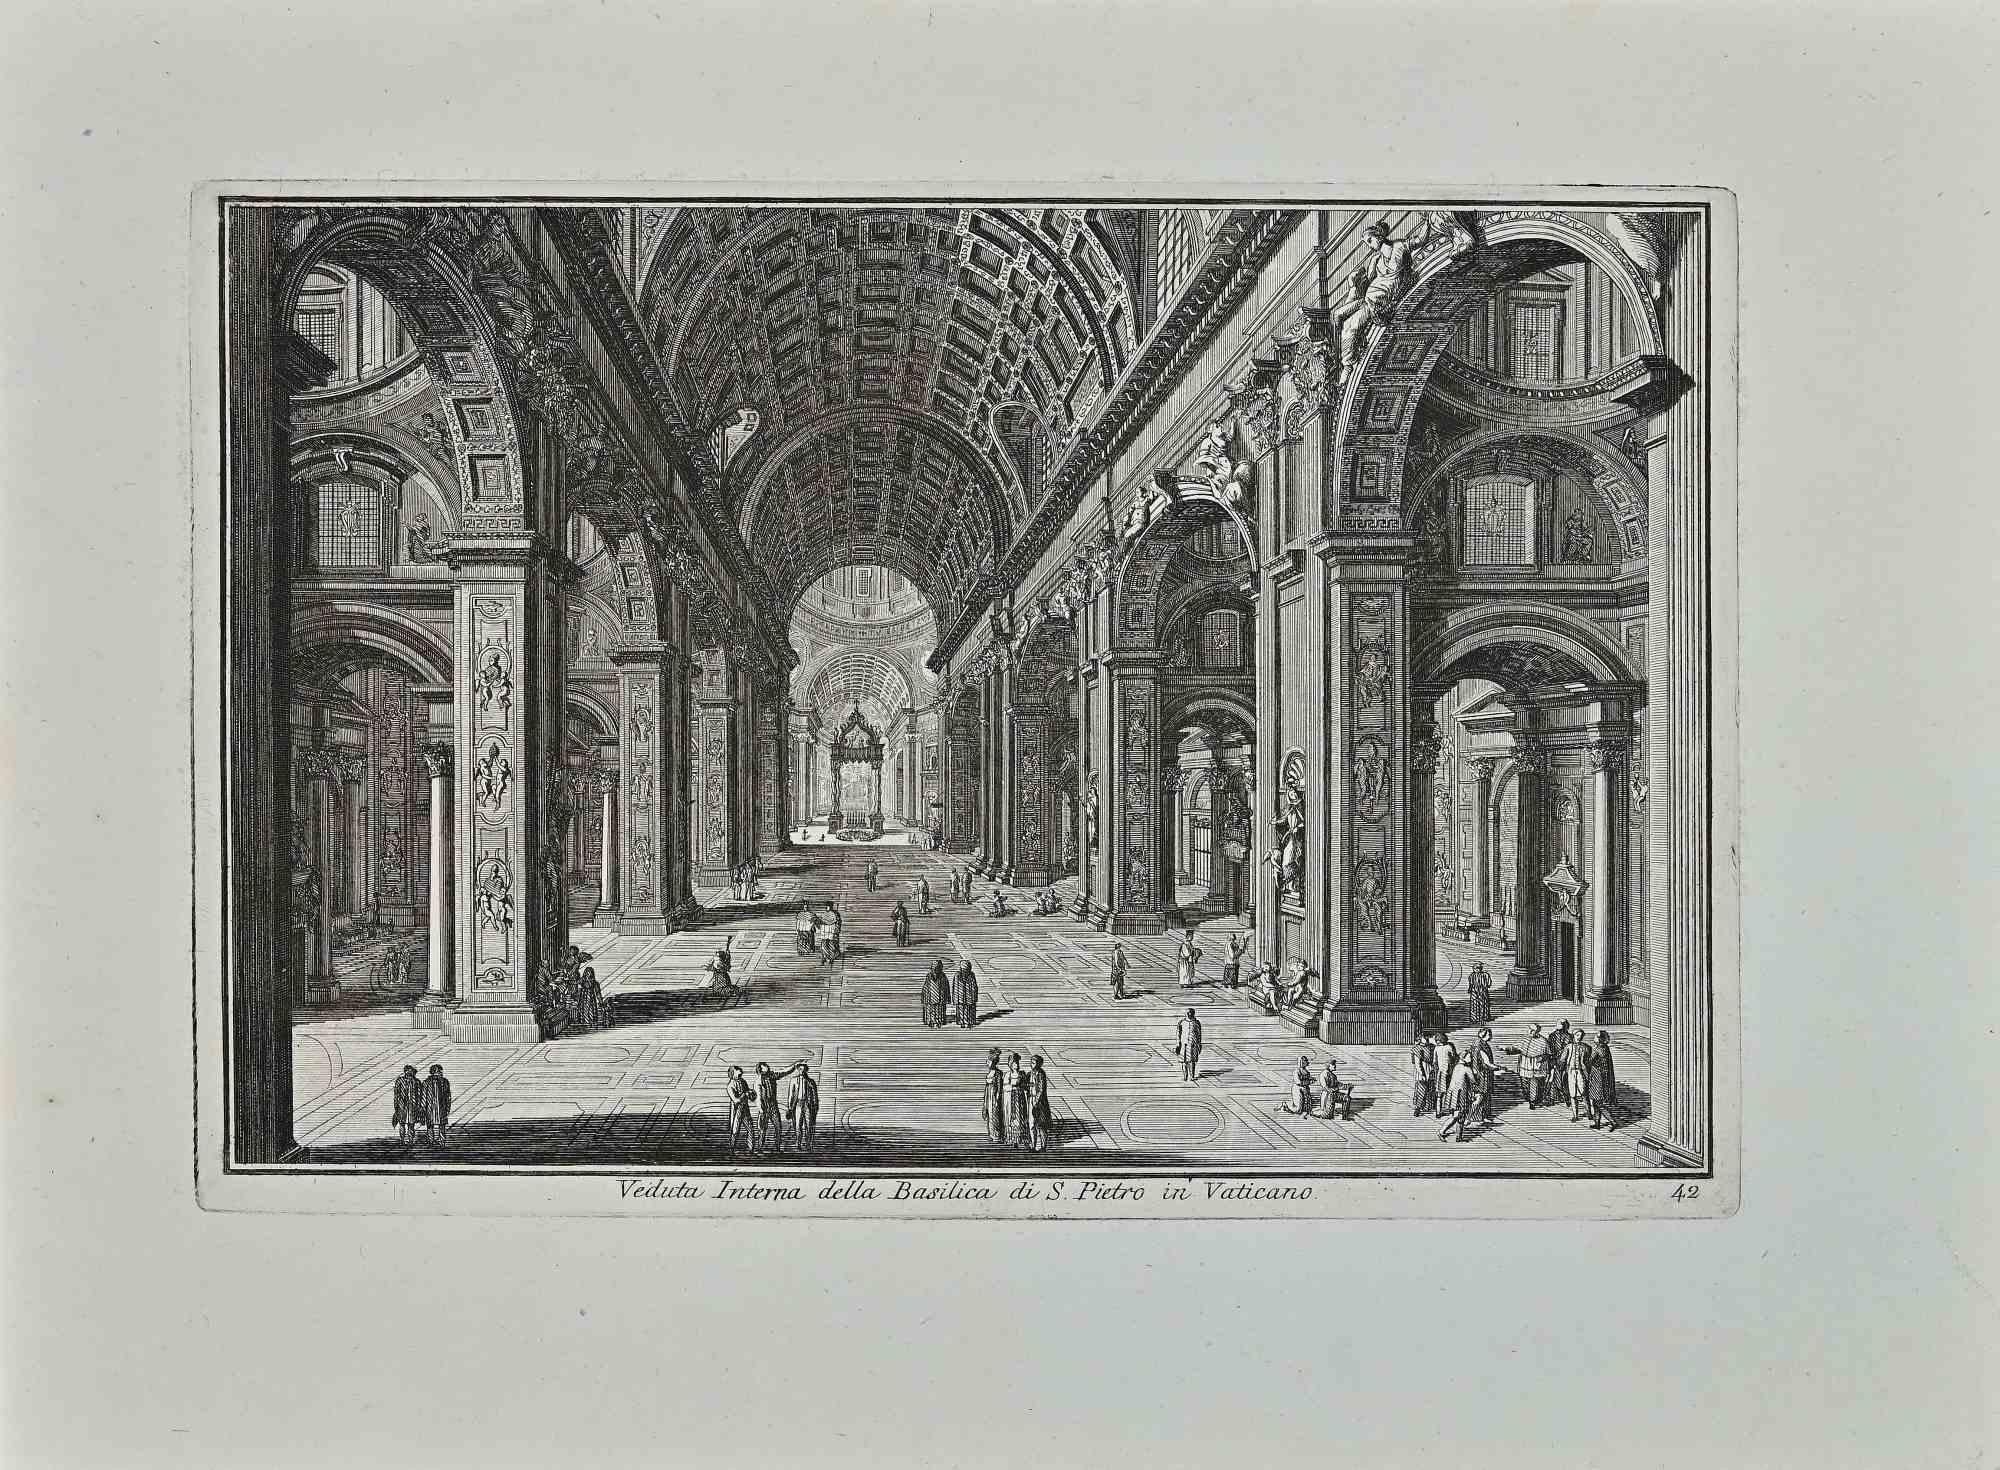 Interior of S.Pietro in Vaticano is an original etching of the Late 18th century realized by Giuseppe Vasi.

Signed and titled on plate lower margin. 

Good conditions.

Giuseppe Vasi  (Corleone,1710 - Rome, 1782) was an engraver, architect, and